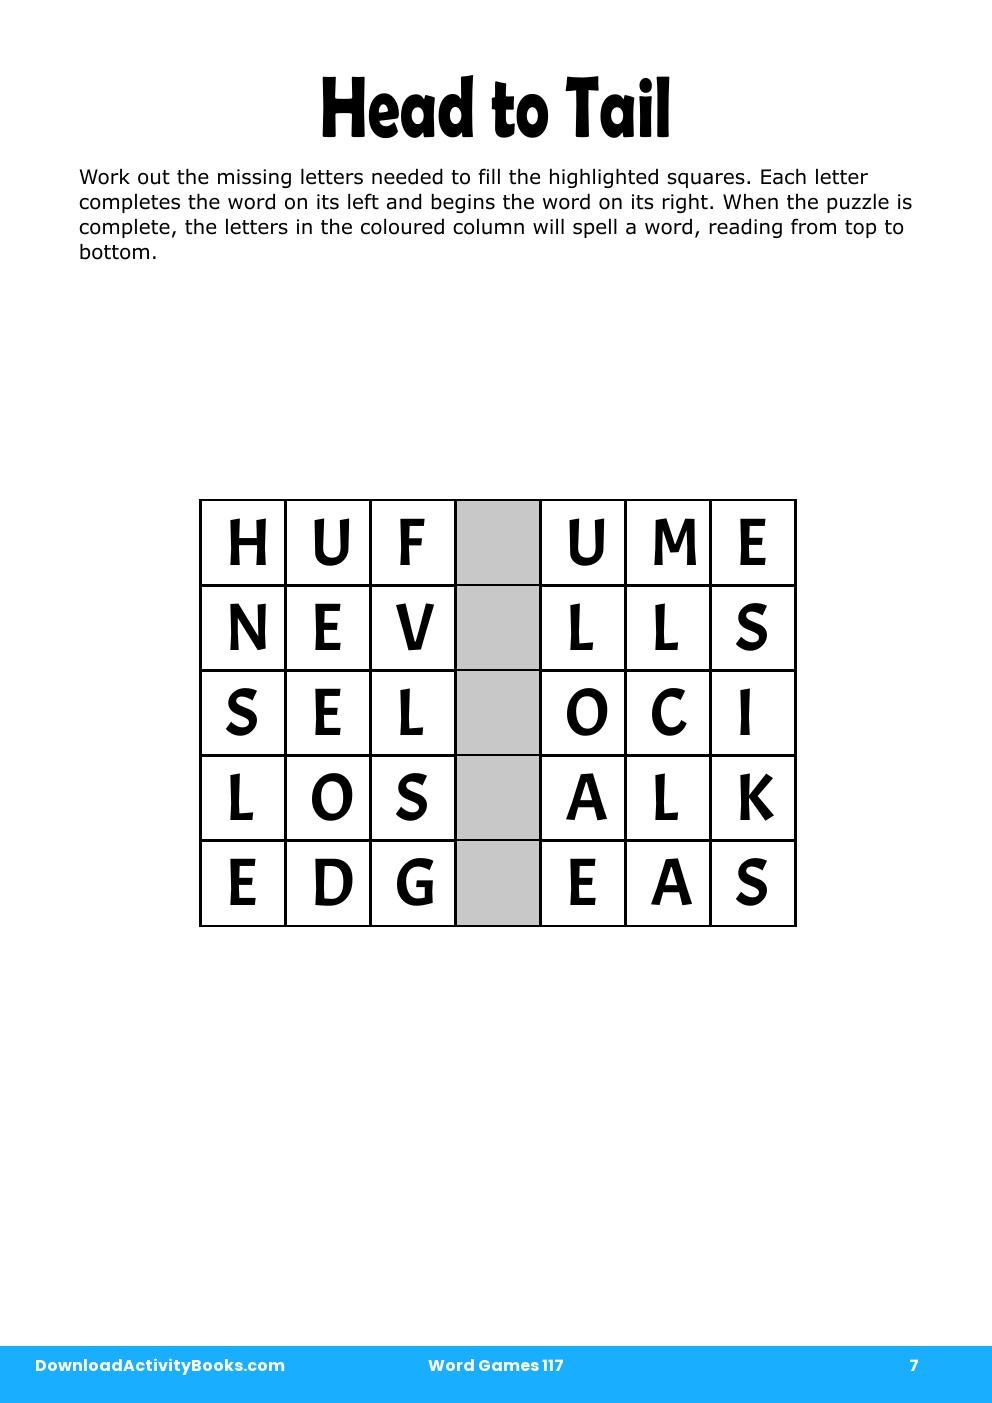 Head to Tail in Word Games 117